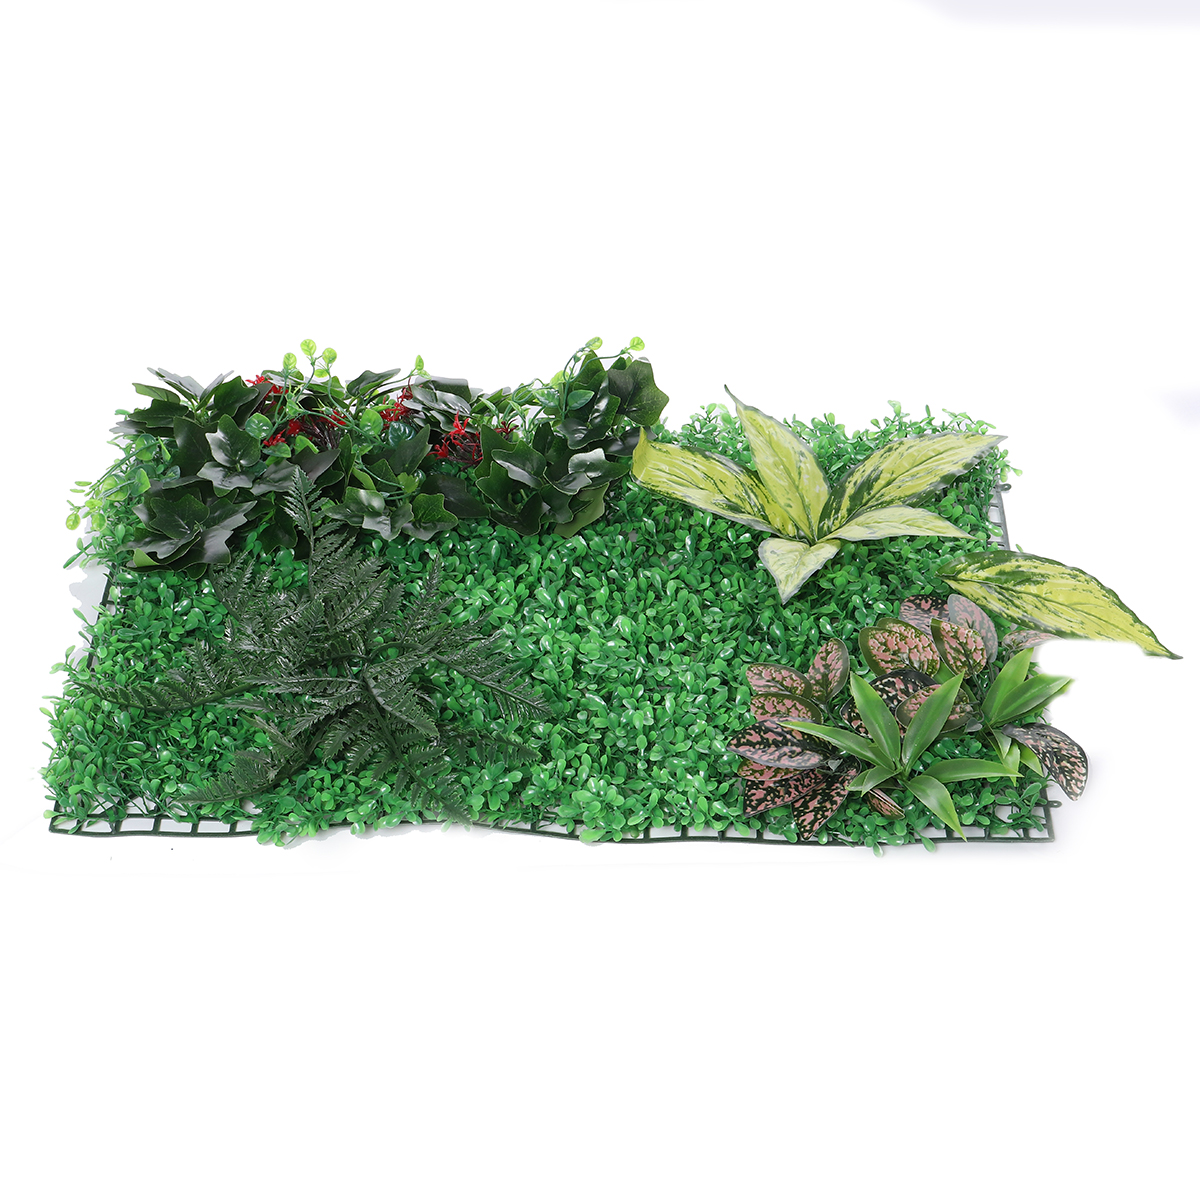 Green-Plant-Wall-Background-Wall-Plastic-Simulation-Plant-Lawn-Wall-1731398-22